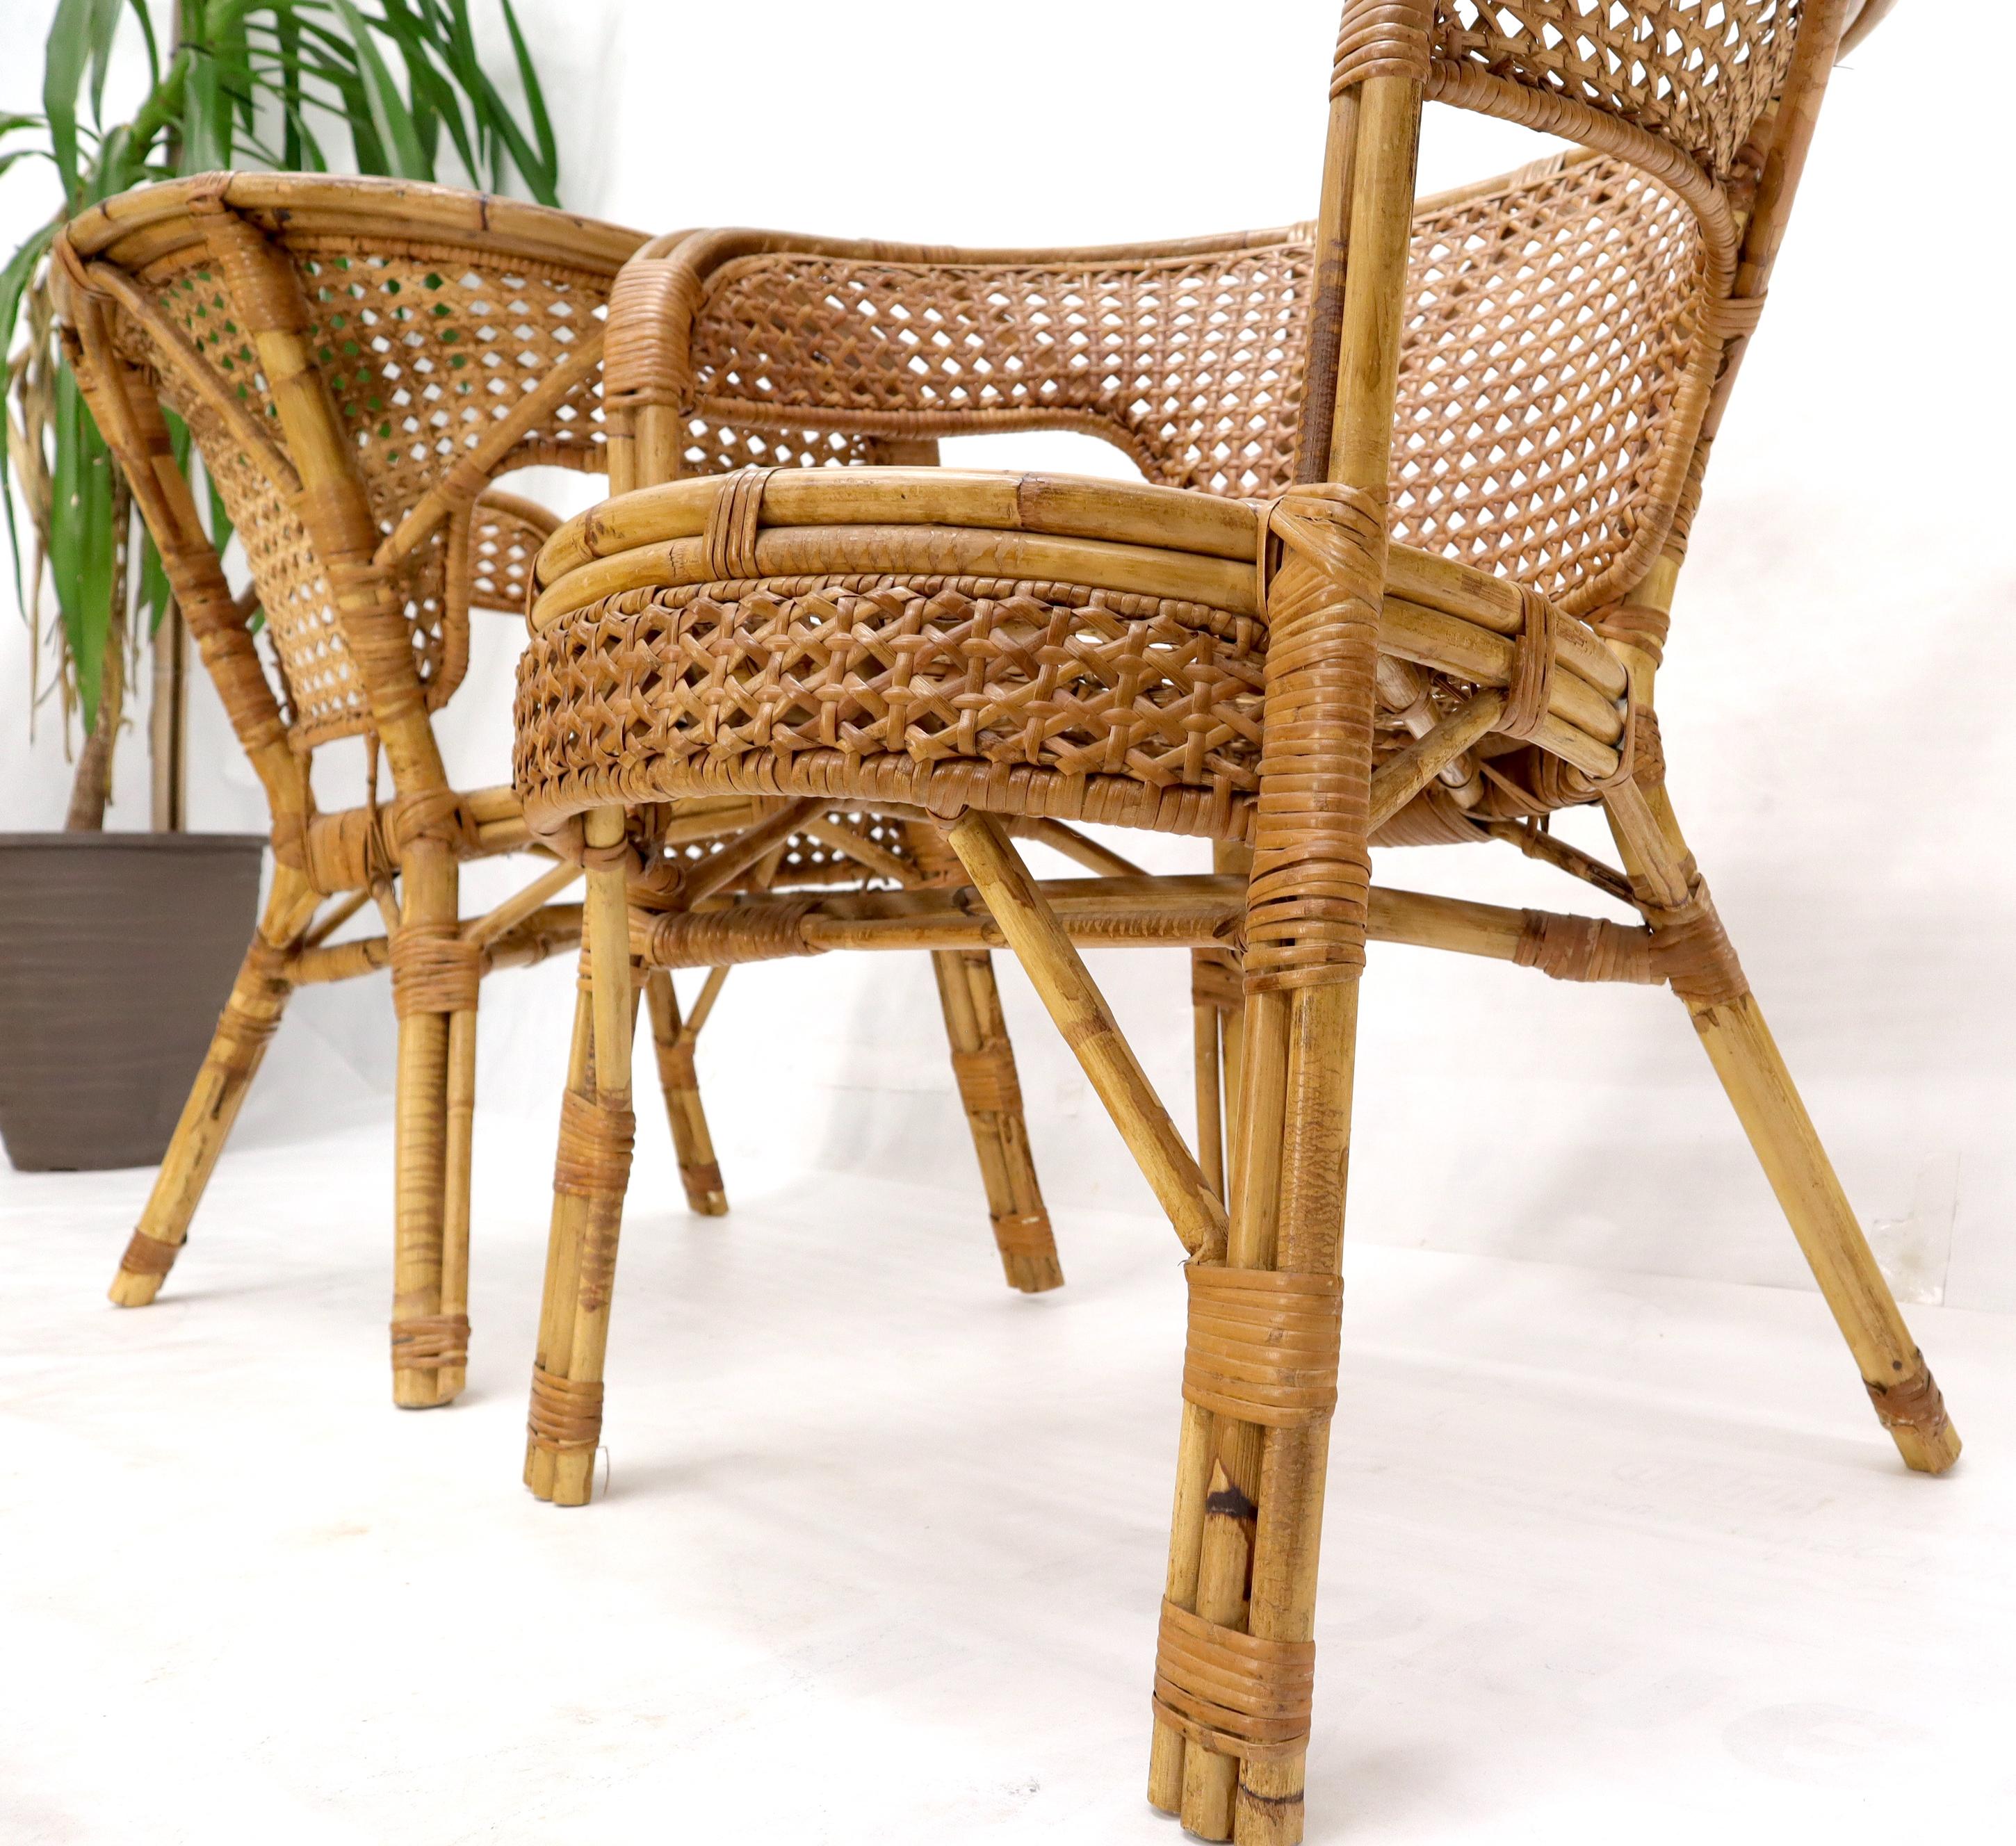 Pair of Stunning Round Barrel Shape Bamboo Rattan Cane Seat Chairs For Sale 1